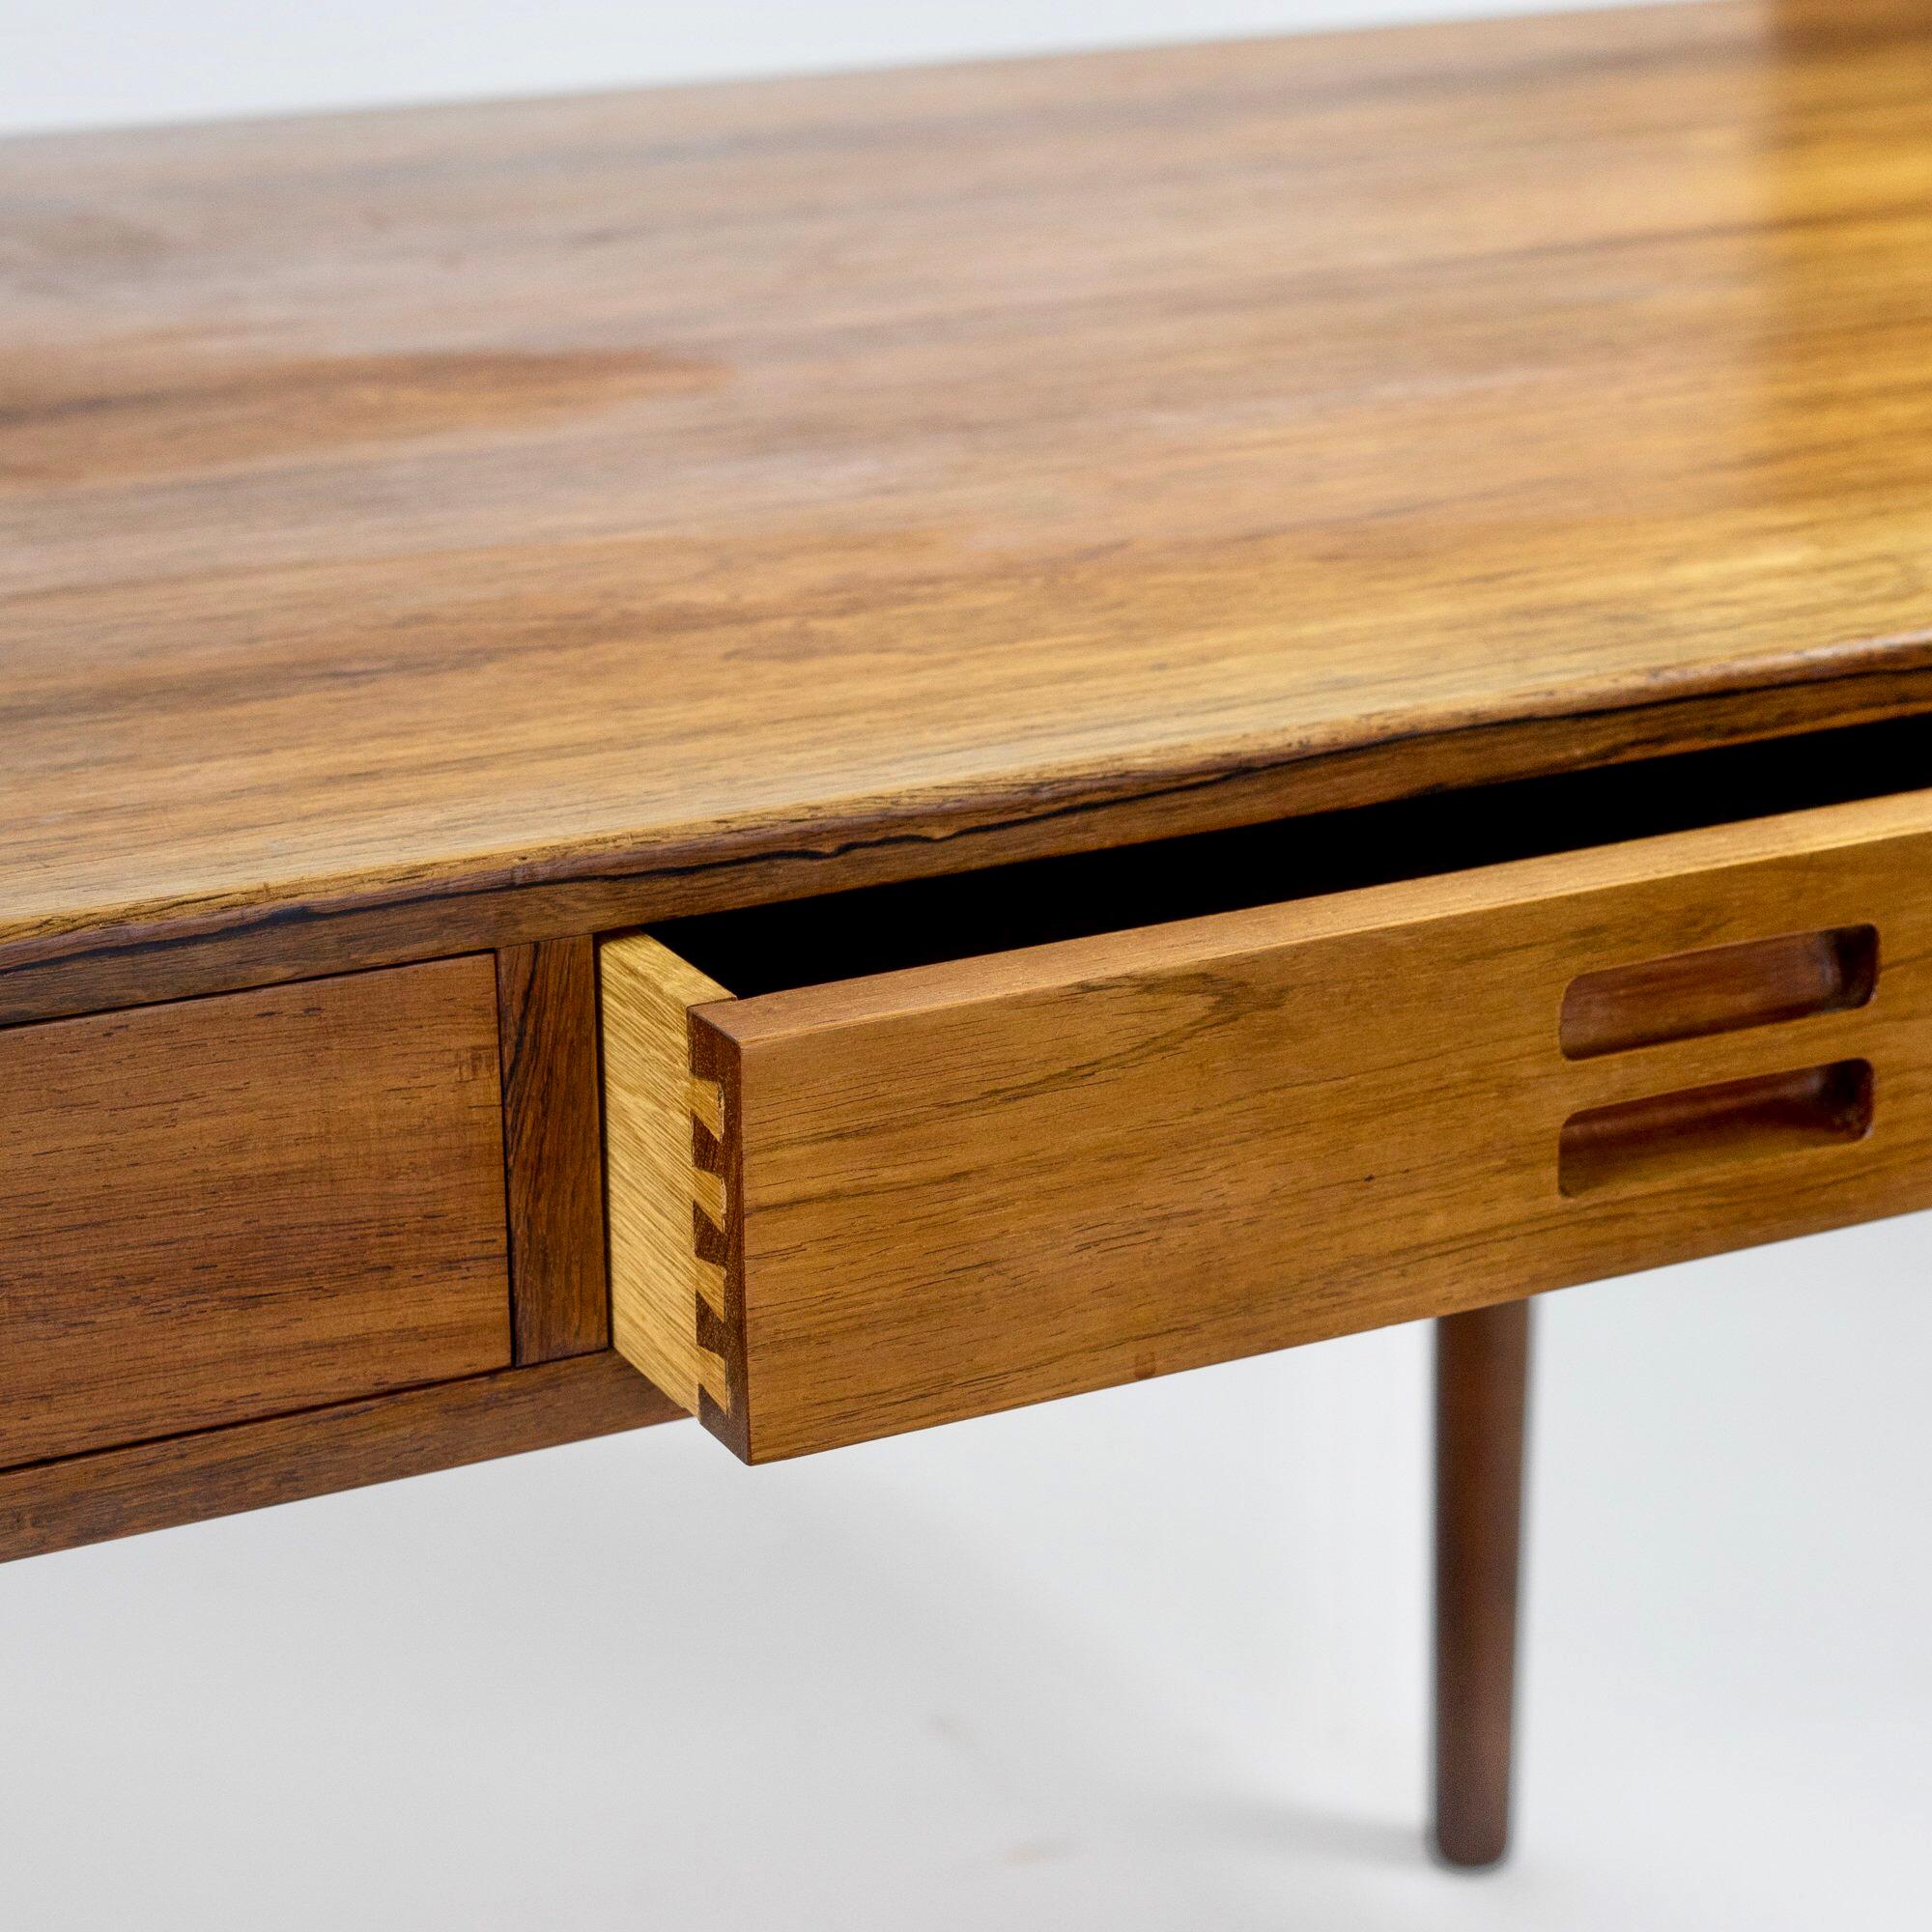 Freestanding Nanna Ditzel rosewood desk in rosewood with four integrated drawers. Designed 1955 and executed at cabinetmaker Søren Willadsen, Denmark as model 93-4.